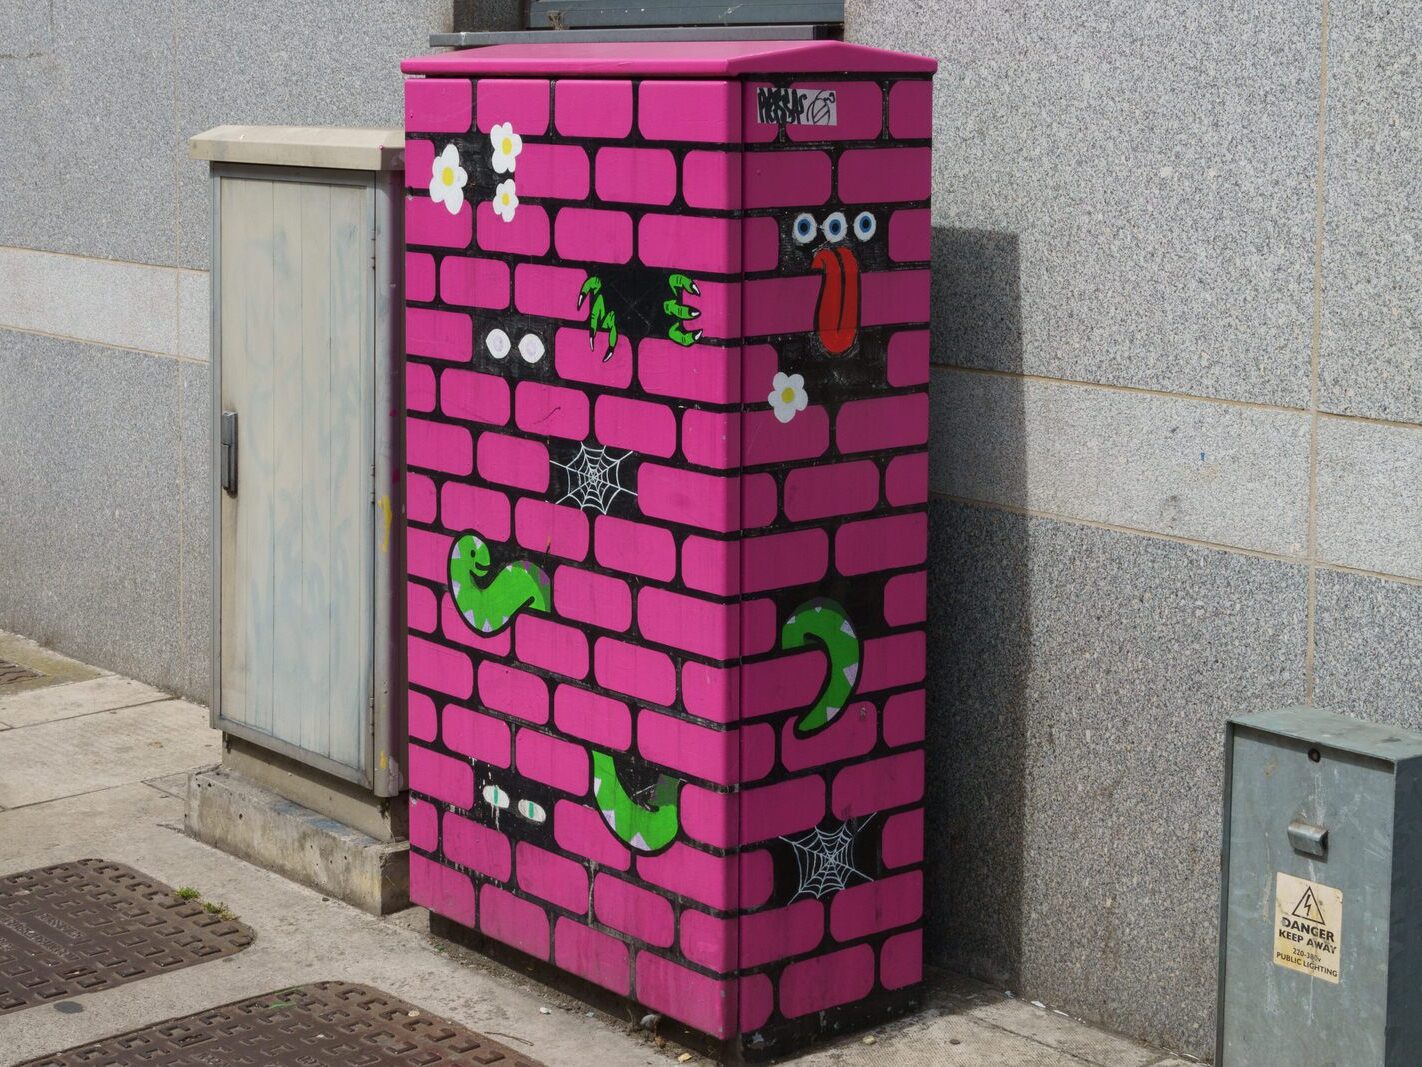 MORE PAINT-A-BOX STREET ART BY BY MARTA OKUKICZ [A TALE IN THE WALL]-236746-1